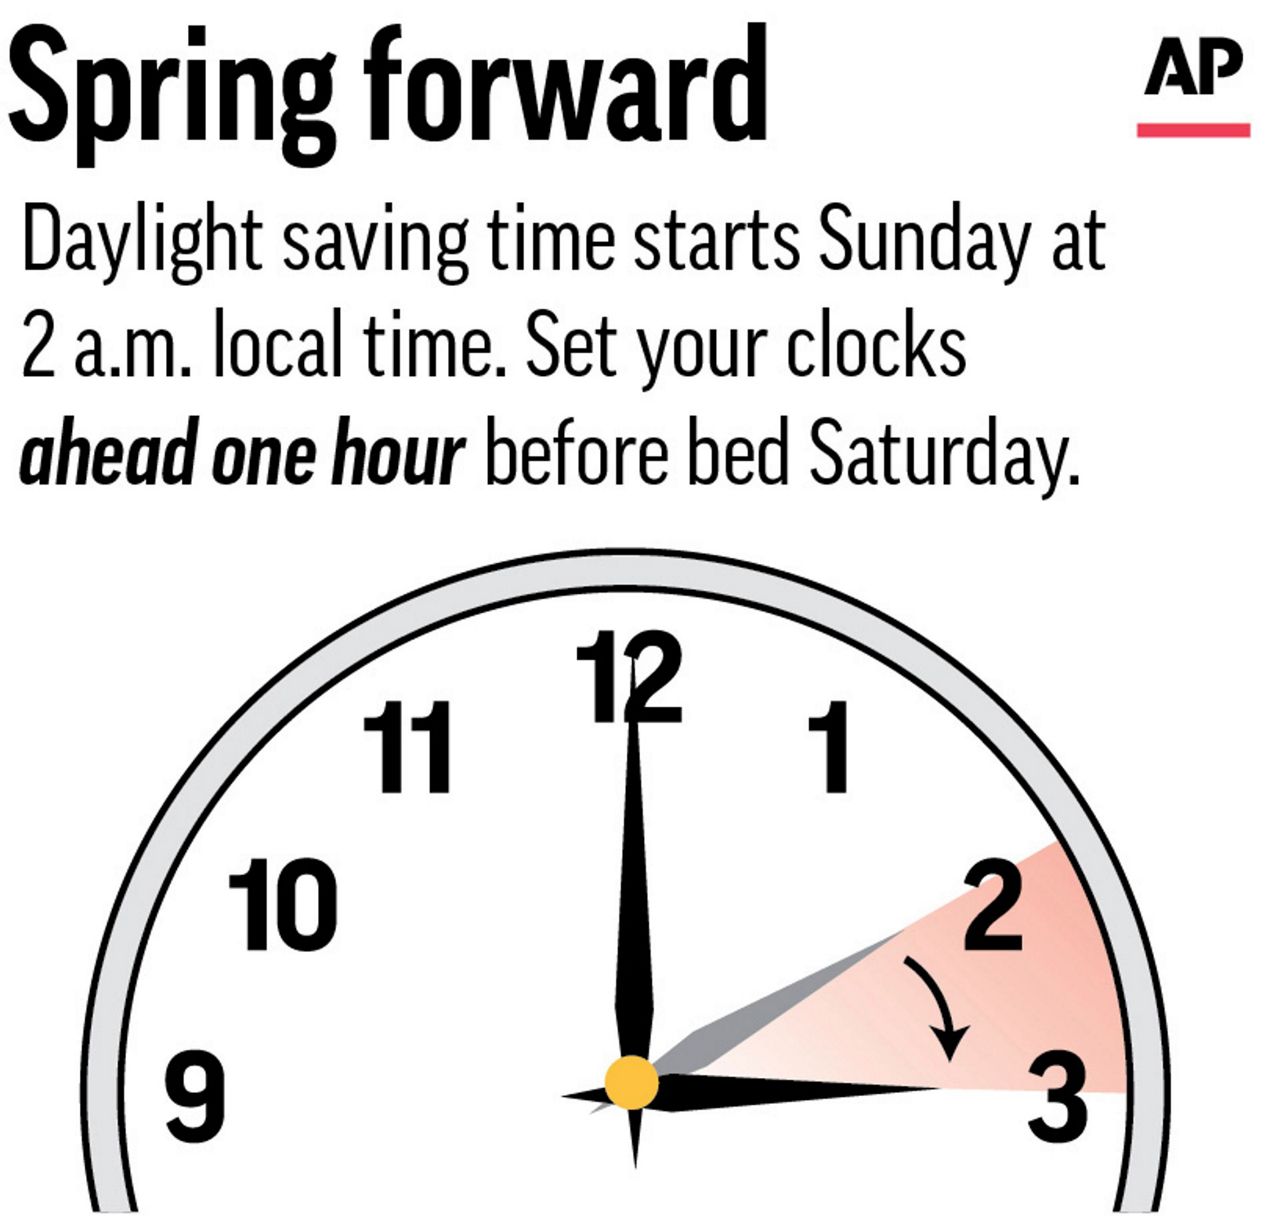 It's time to 'spring forward' this weekend in most of the US